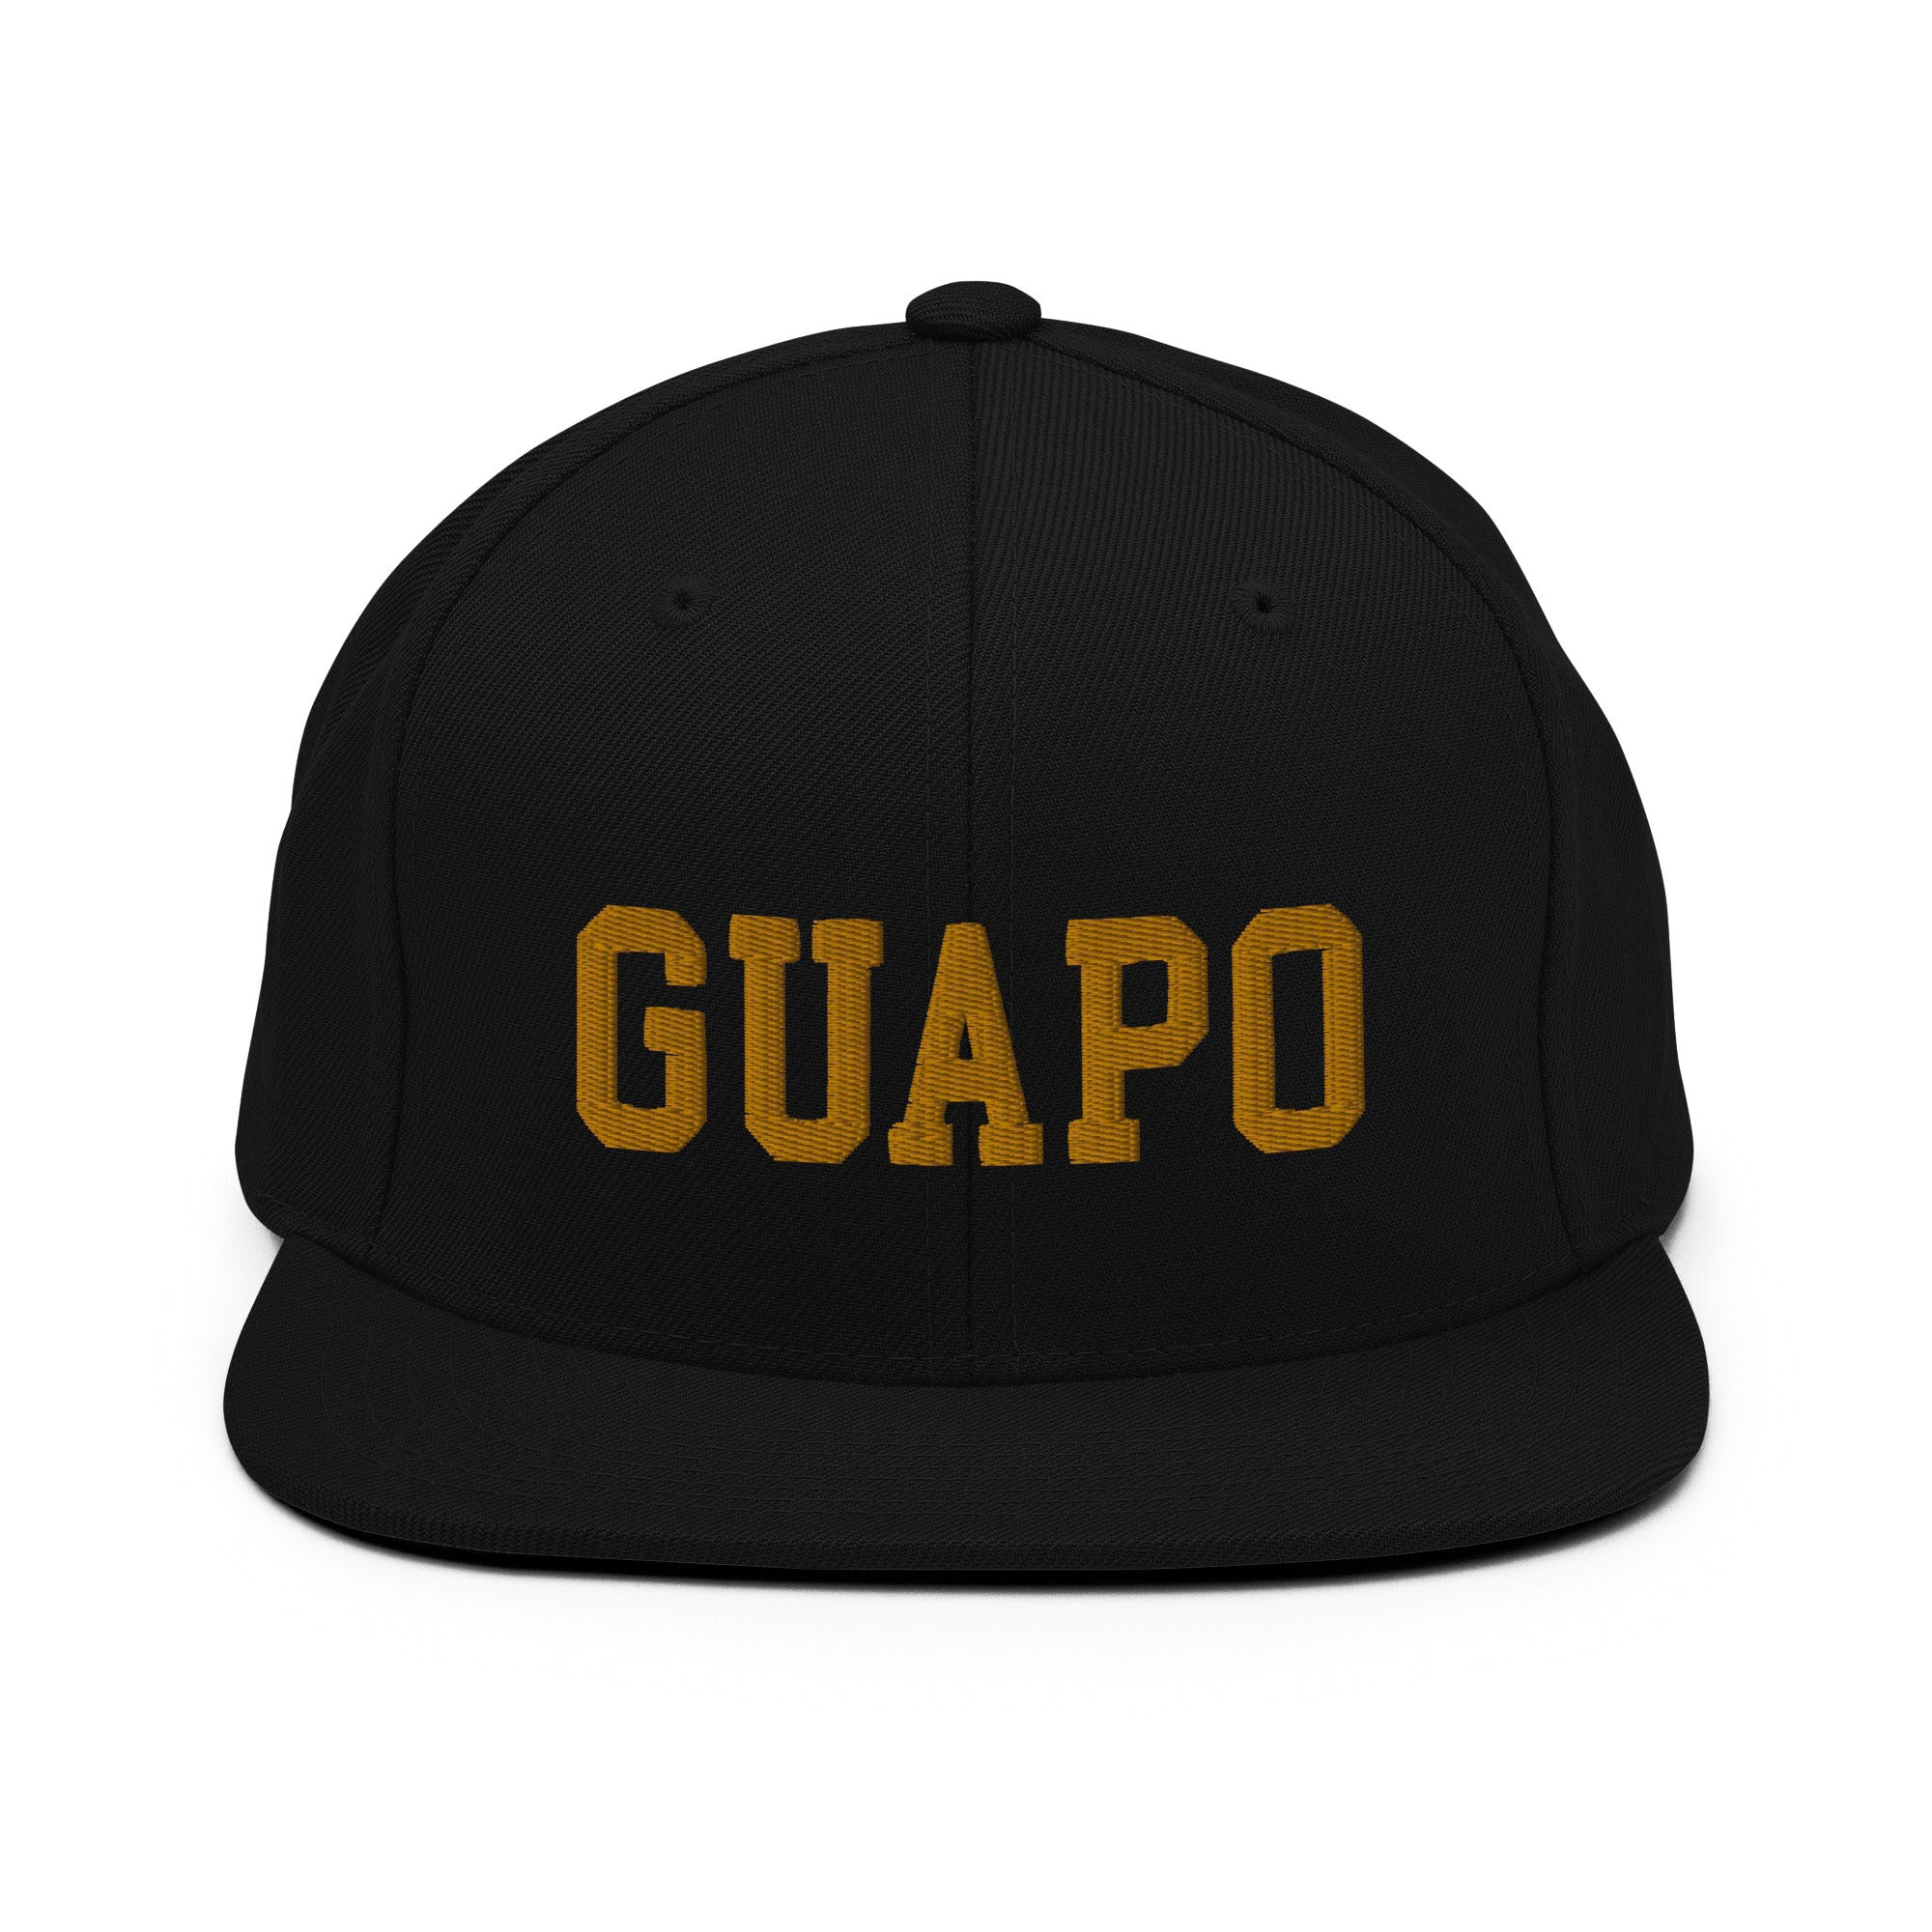 Black OG latino snapback cap baseball hat with embroidered gold letters that say, "GUAPO"